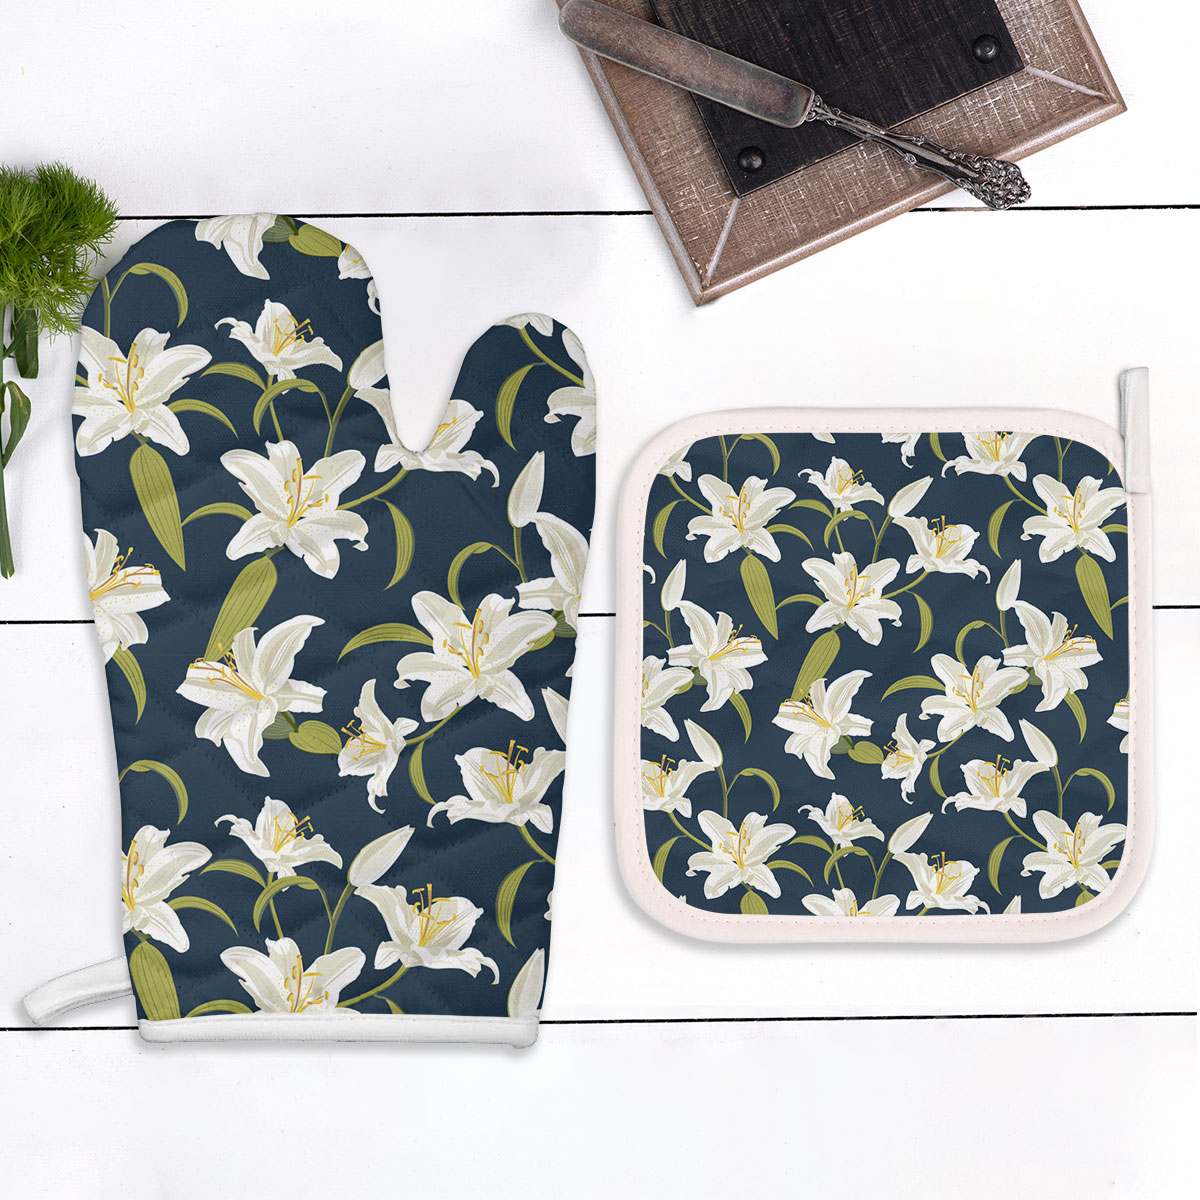 Lily Seamless Pattern On Blue Background Oven Mitts Pot Holder Set